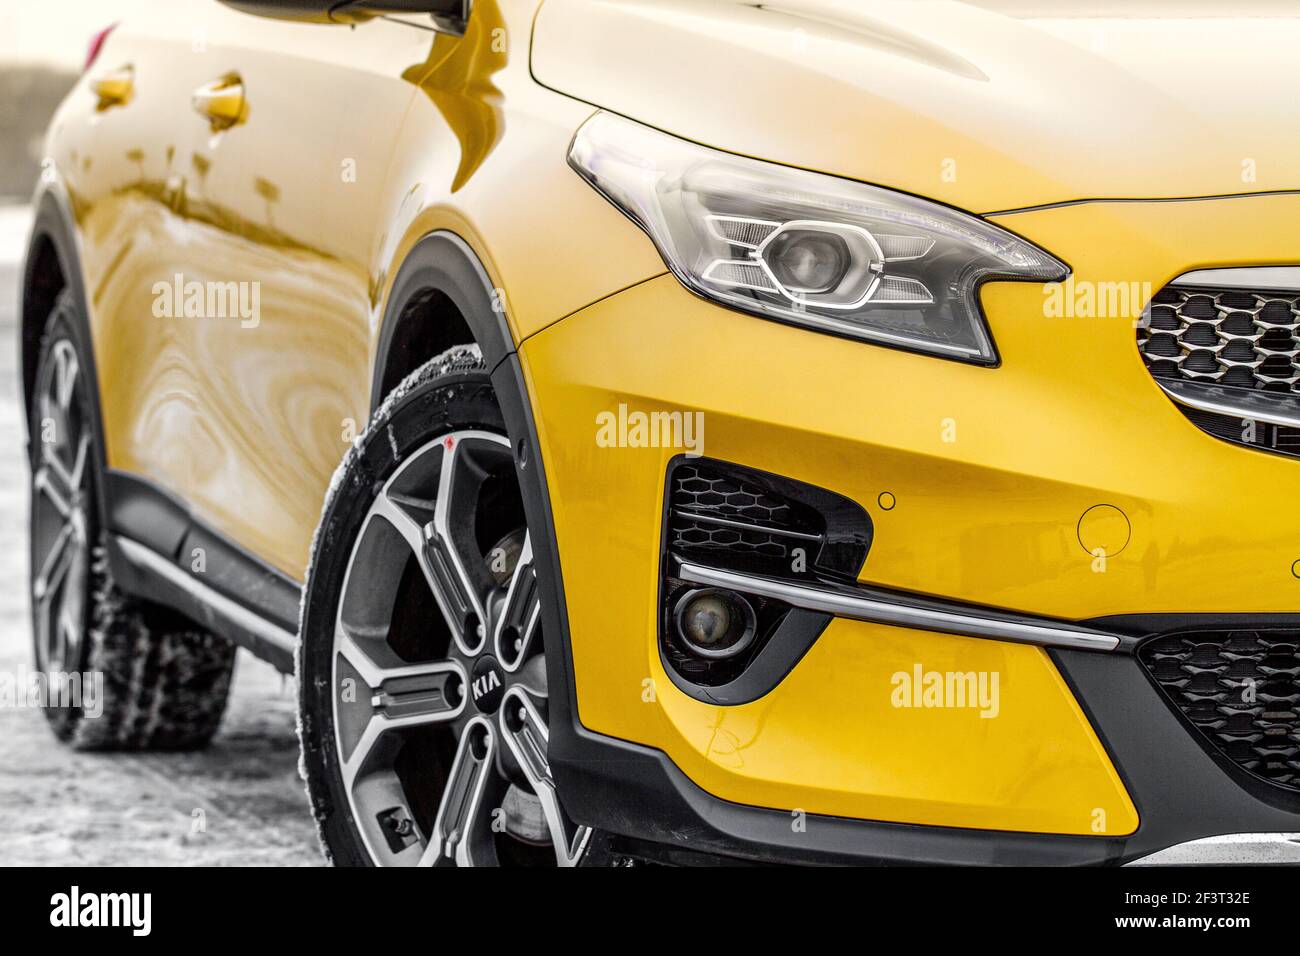 Brussels, Belgium, Jan 09, 2020: new Kia XCeed at Brussels Motor Show,  first generation, compact SUV car produced by Kia Motors Stock Photo - Alamy